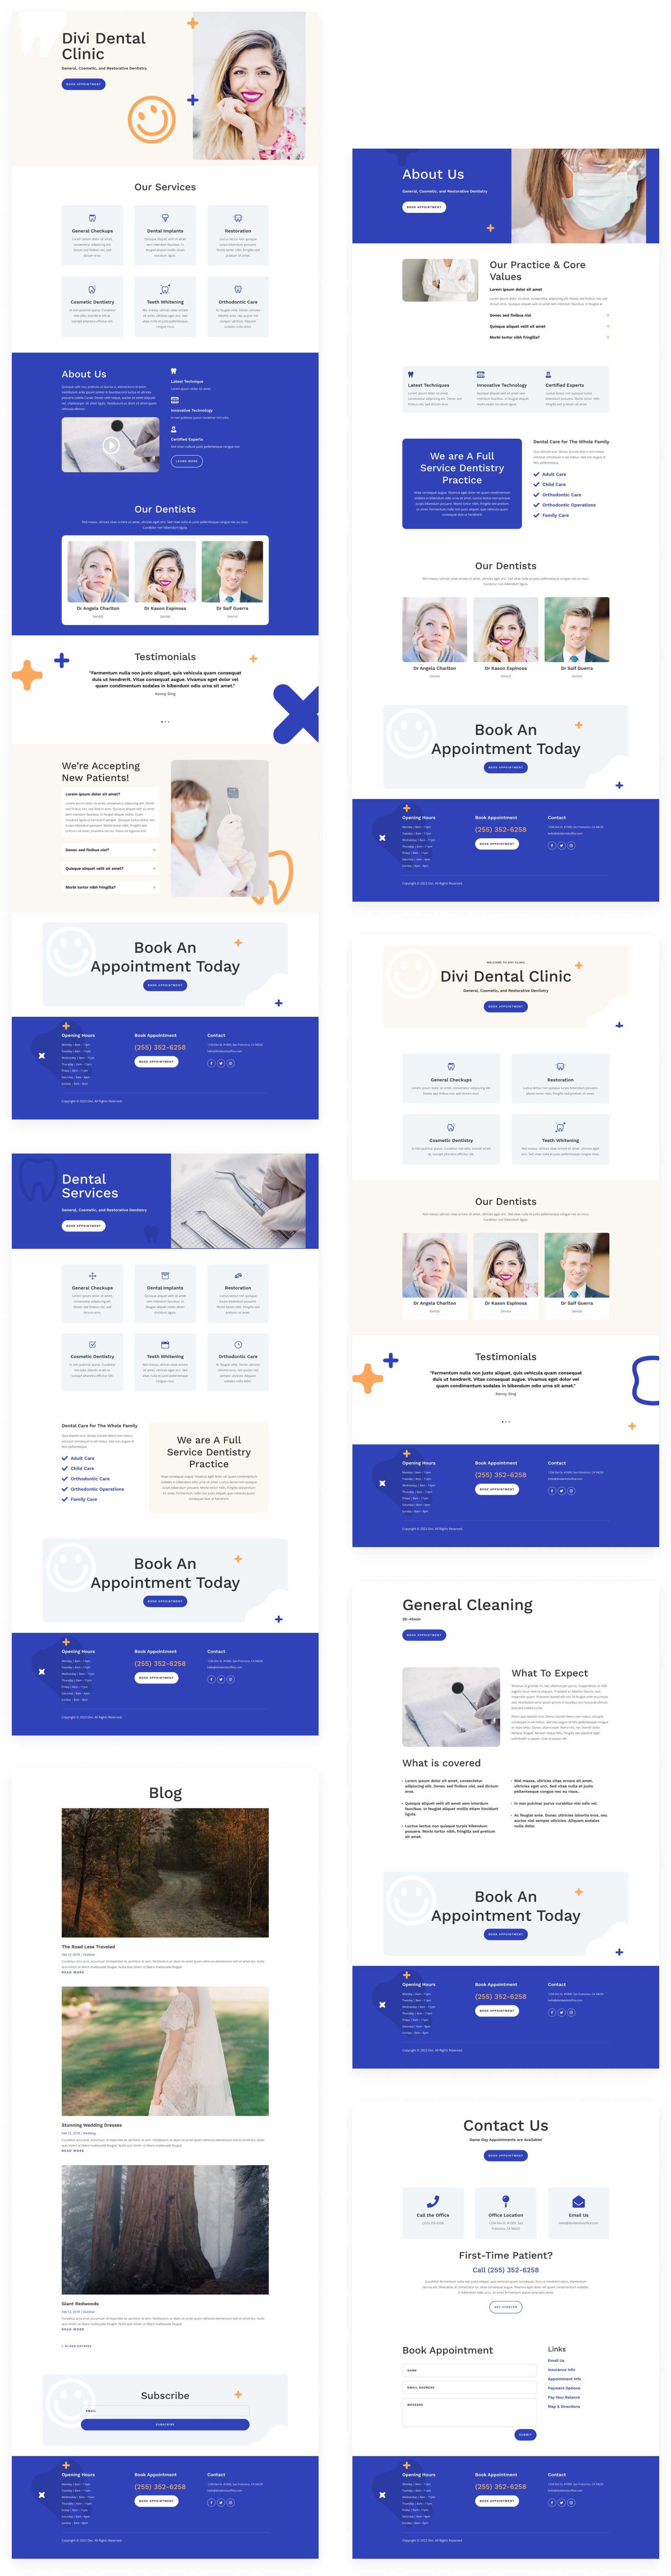 Dental Office layout pack